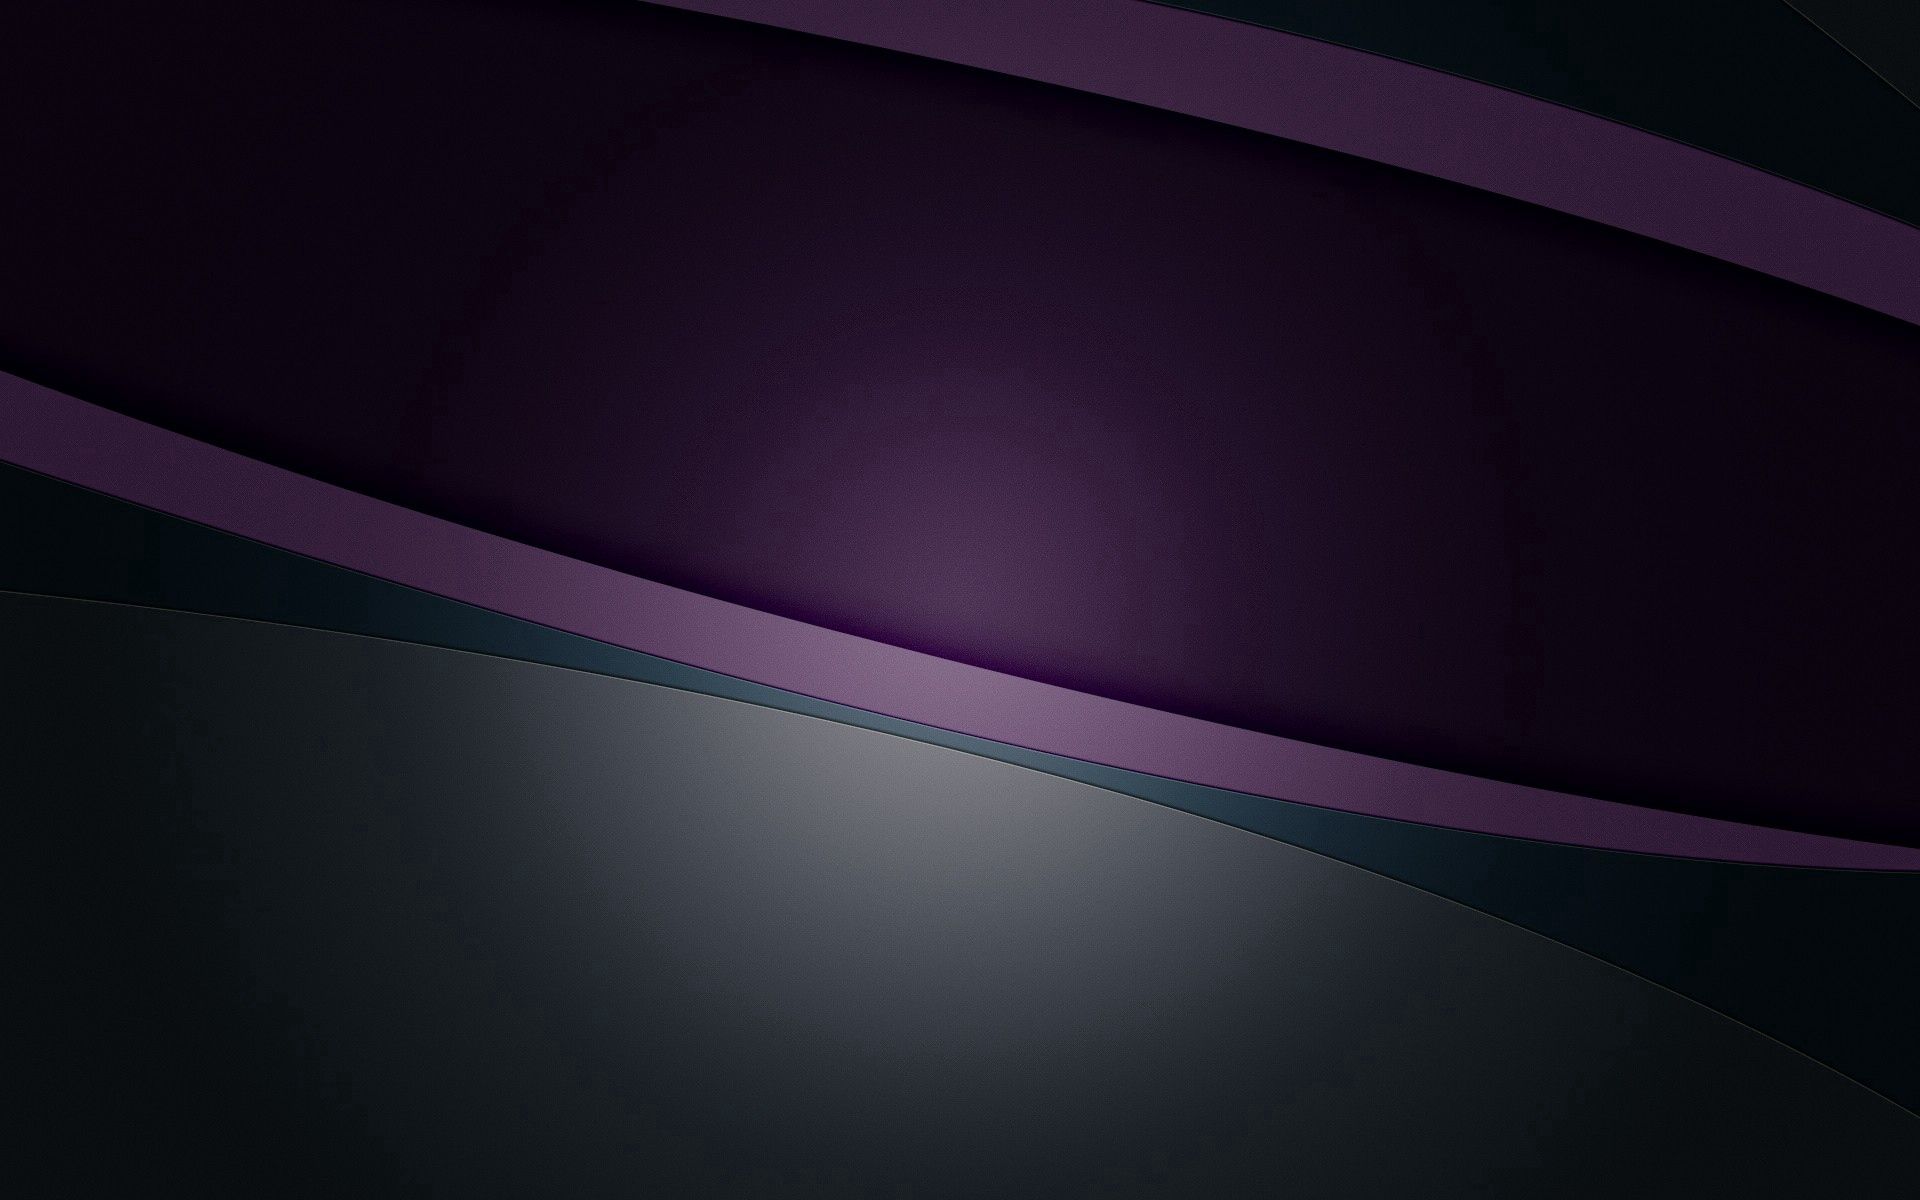 HD wallpaper shadow, abstract, violet, lines, form, grey, purple